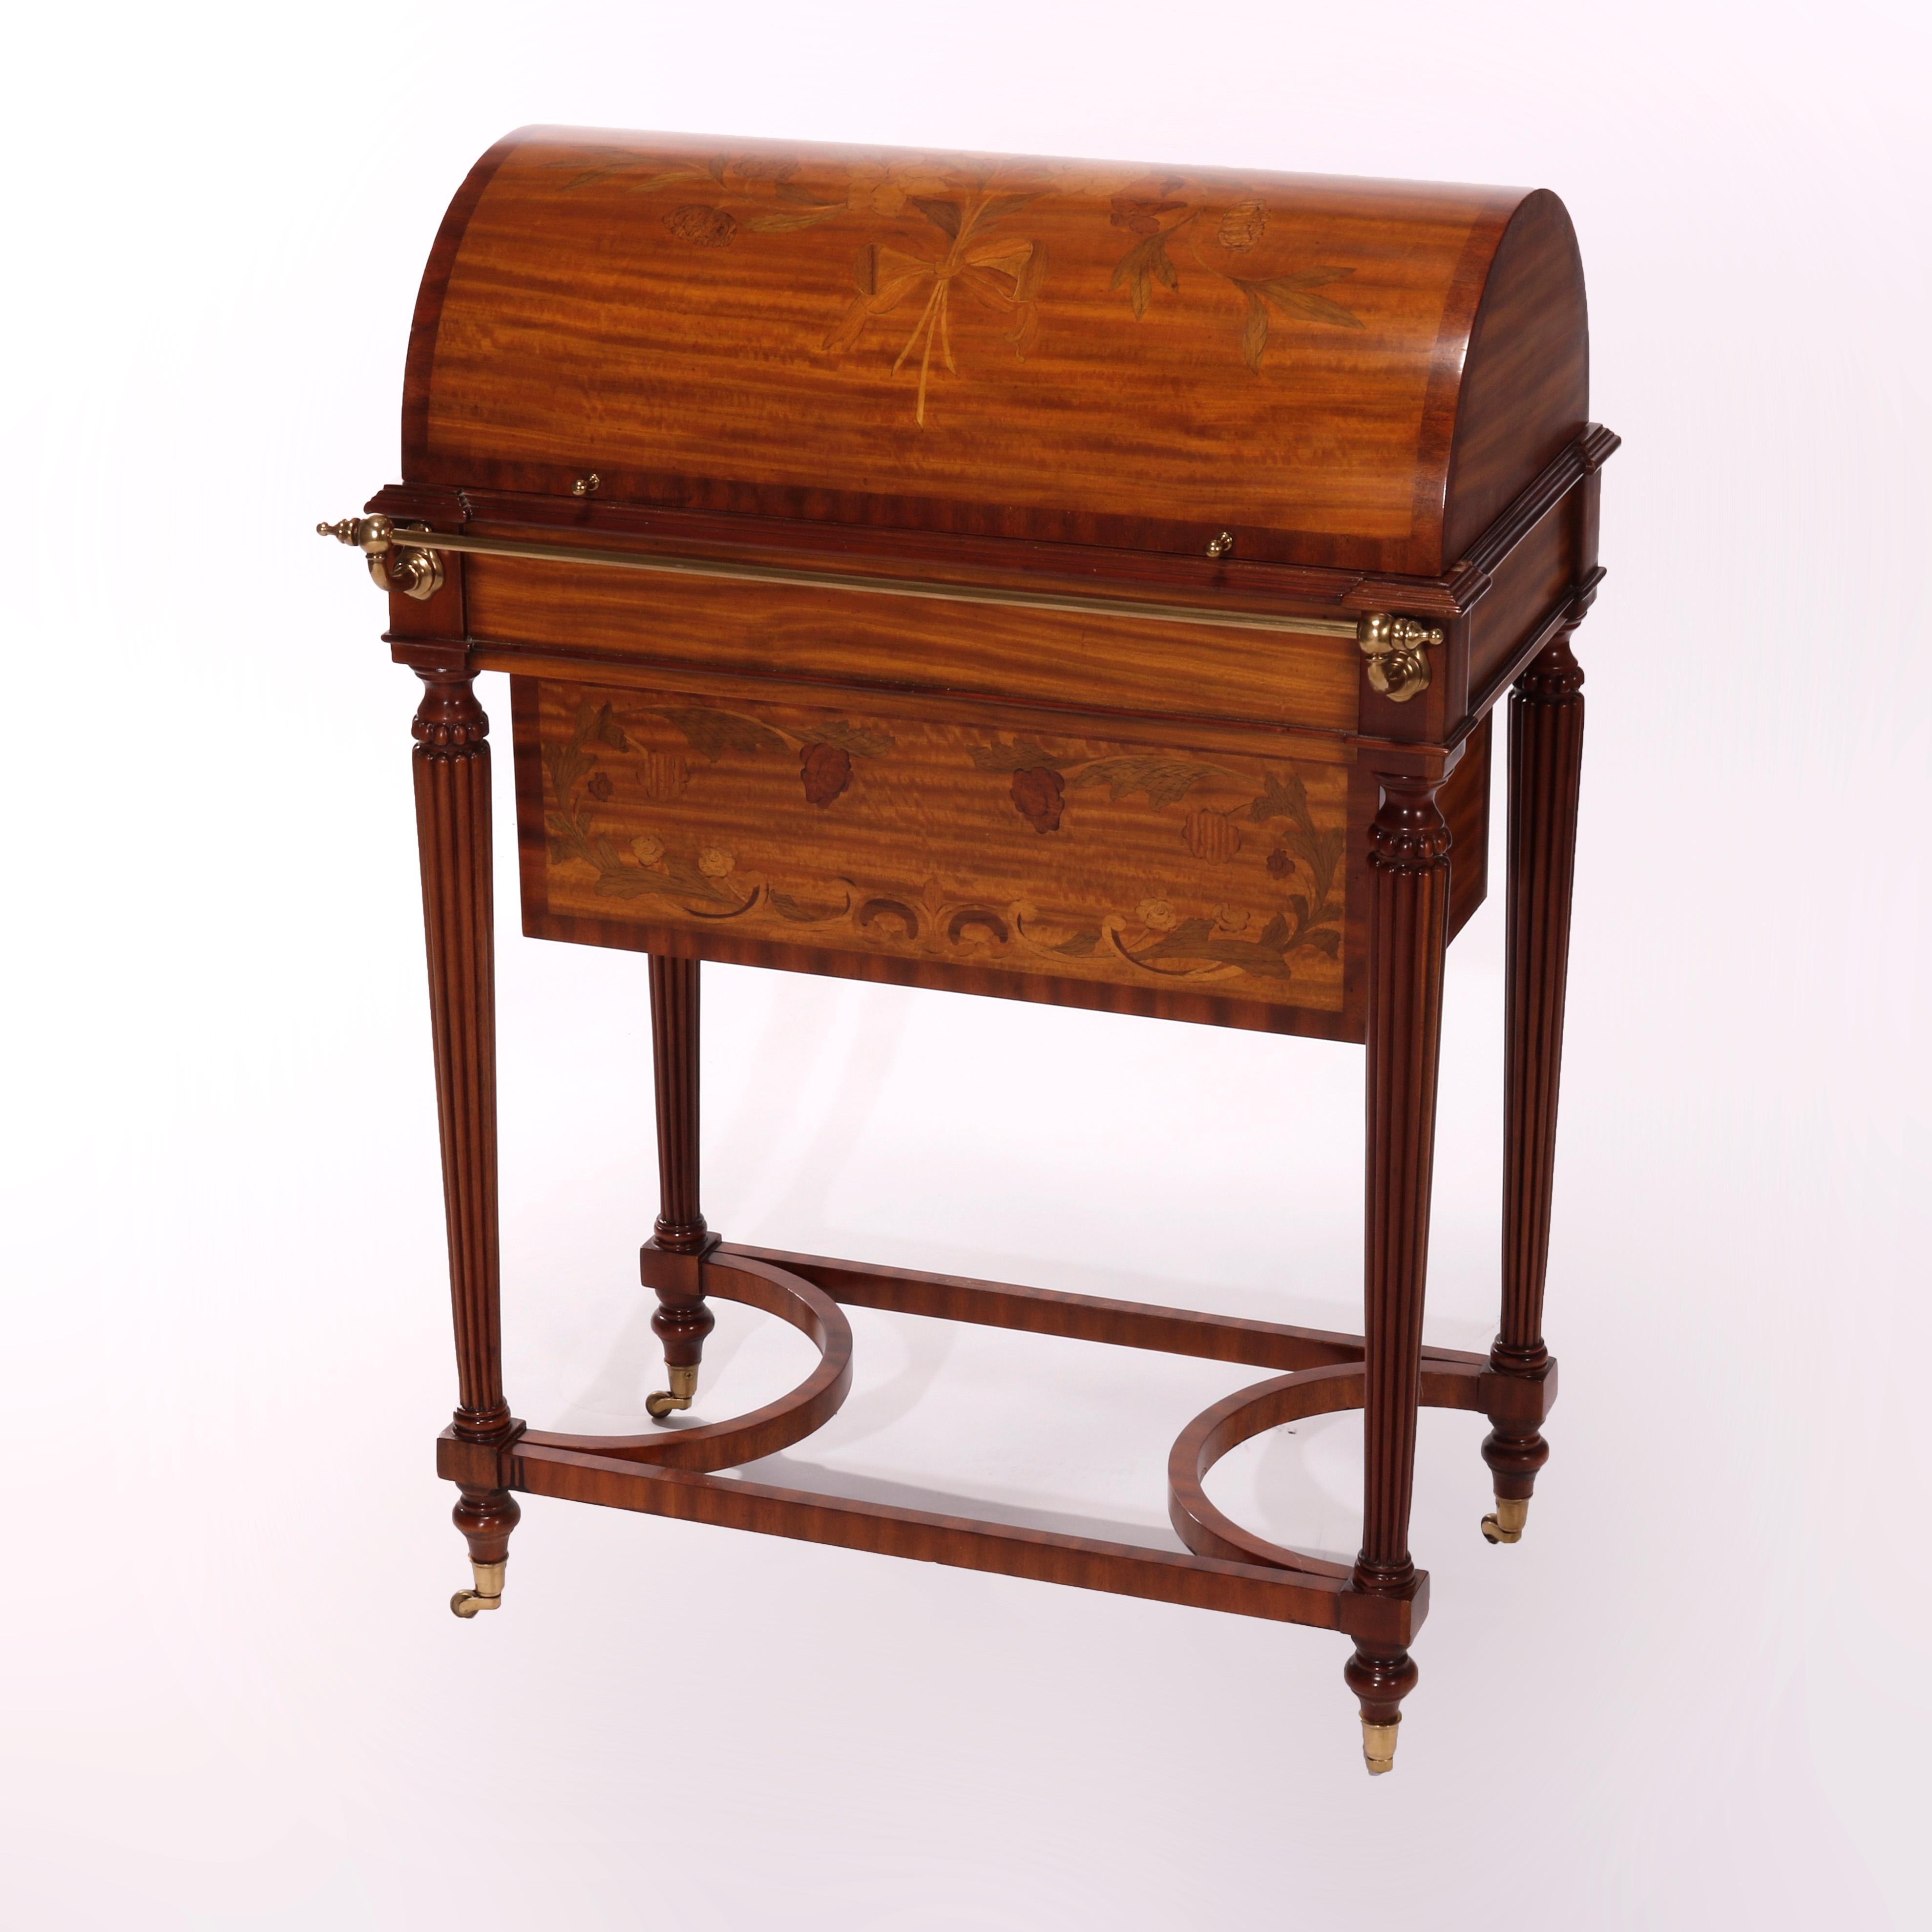 A liquor cellarette by Maitland Smith offers satinwood construction with domed top having floral marquetry inlay and opening to storage interior and having brass linen rail, raised on tapered and reeded legs with shaped stretcher, maker label as